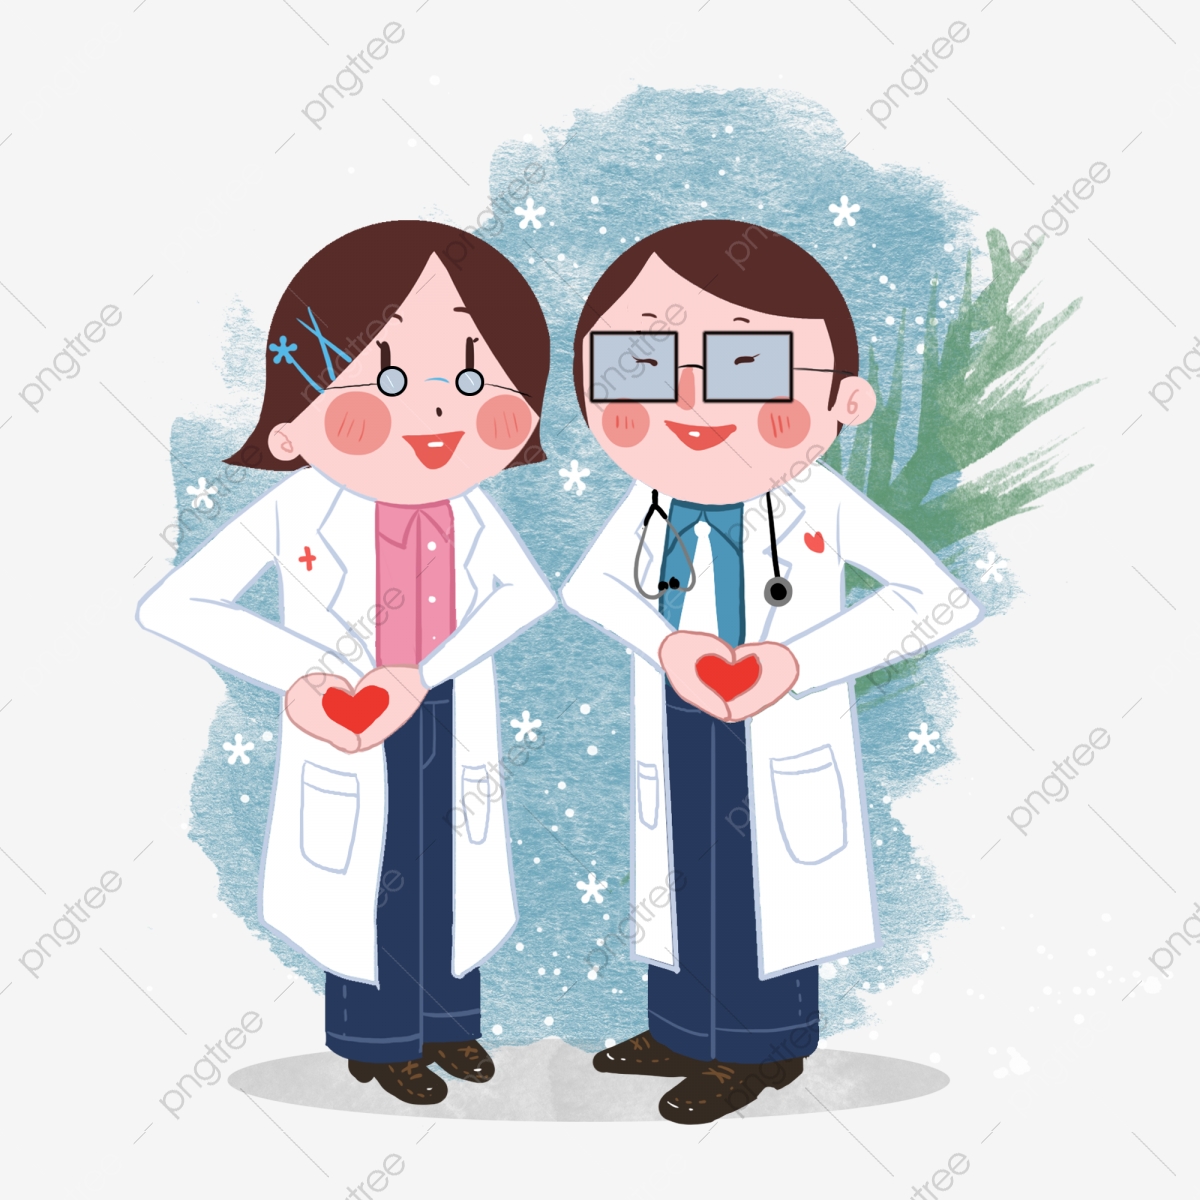 doctor clipart character